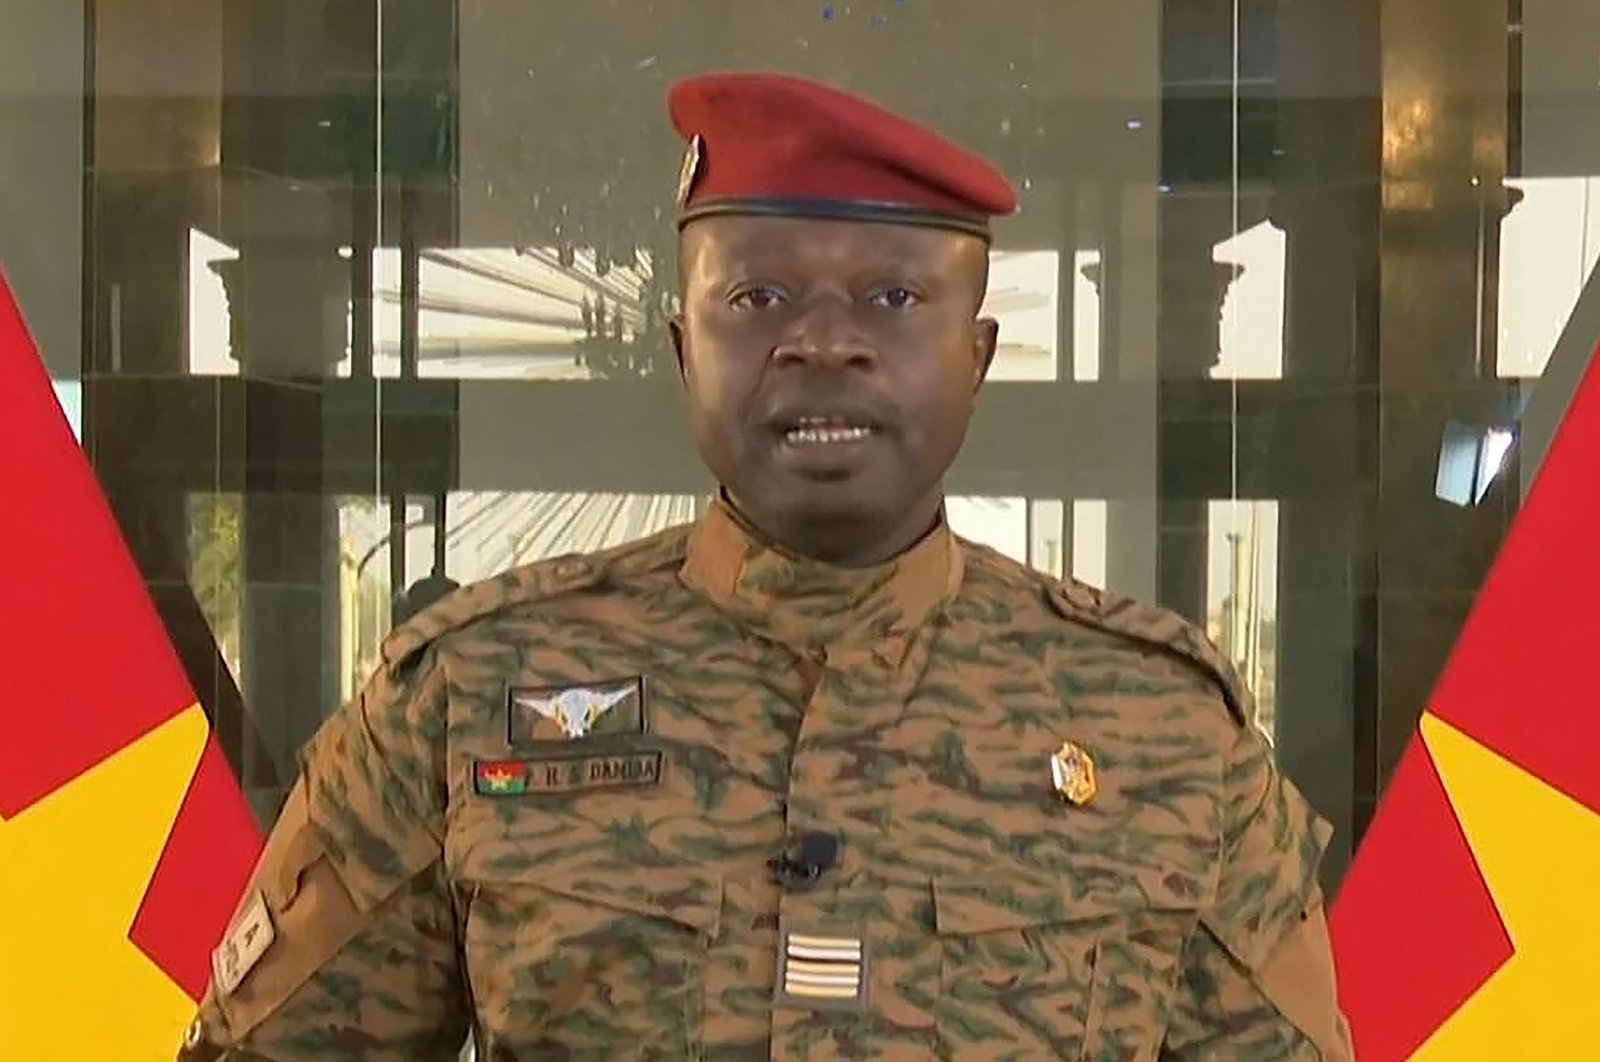 The leader of Burkina Faso&#039;s new military junta Paul Henri Sandaogo Damiba speaks during a televised address, three days after the overthrow of Burkina Faso&#039;s president, in this screengrab from a handout video released by Radiodiffusion Télévision du Burkina on Jan. 22, 2022. (Radiodiffusion Télévision du Burkina via AFP Photo)